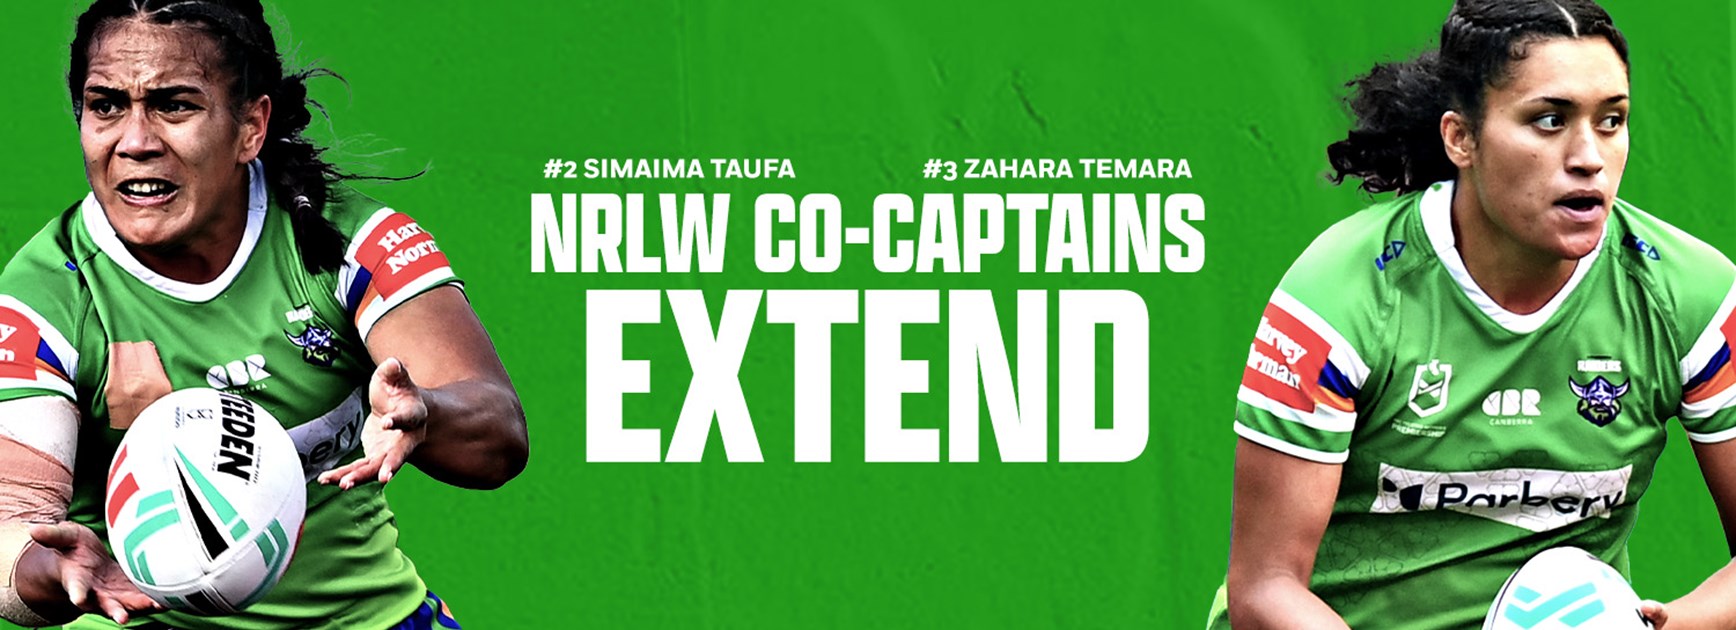 NRLW co-captains Taufa and Temara re-sign with Raiders